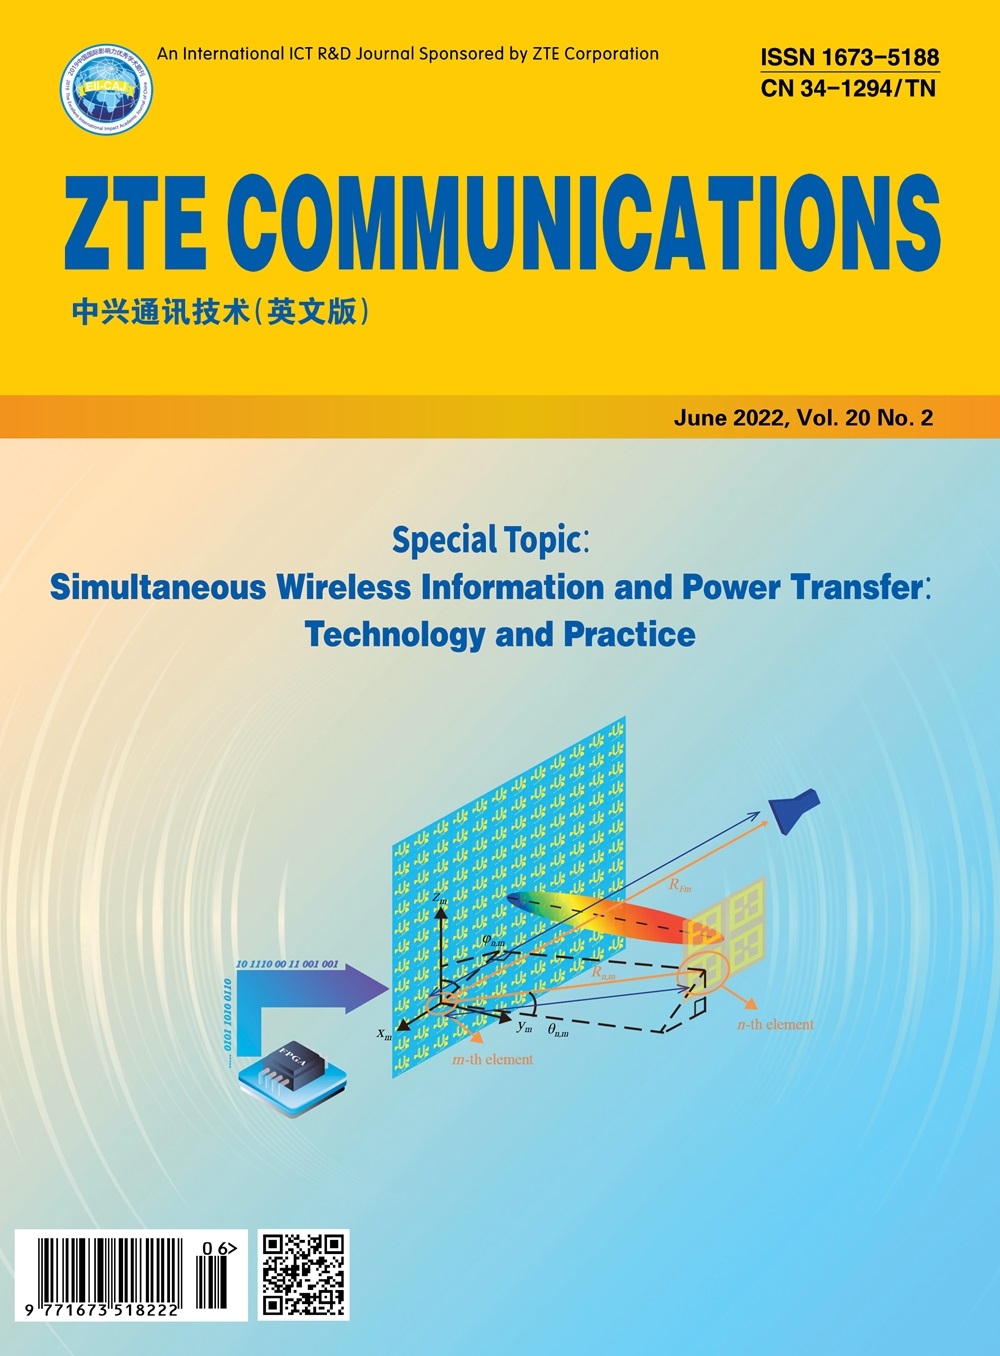 Special Topic on Simultaneous Wireless Information and Power Transfer: Technology and Practice